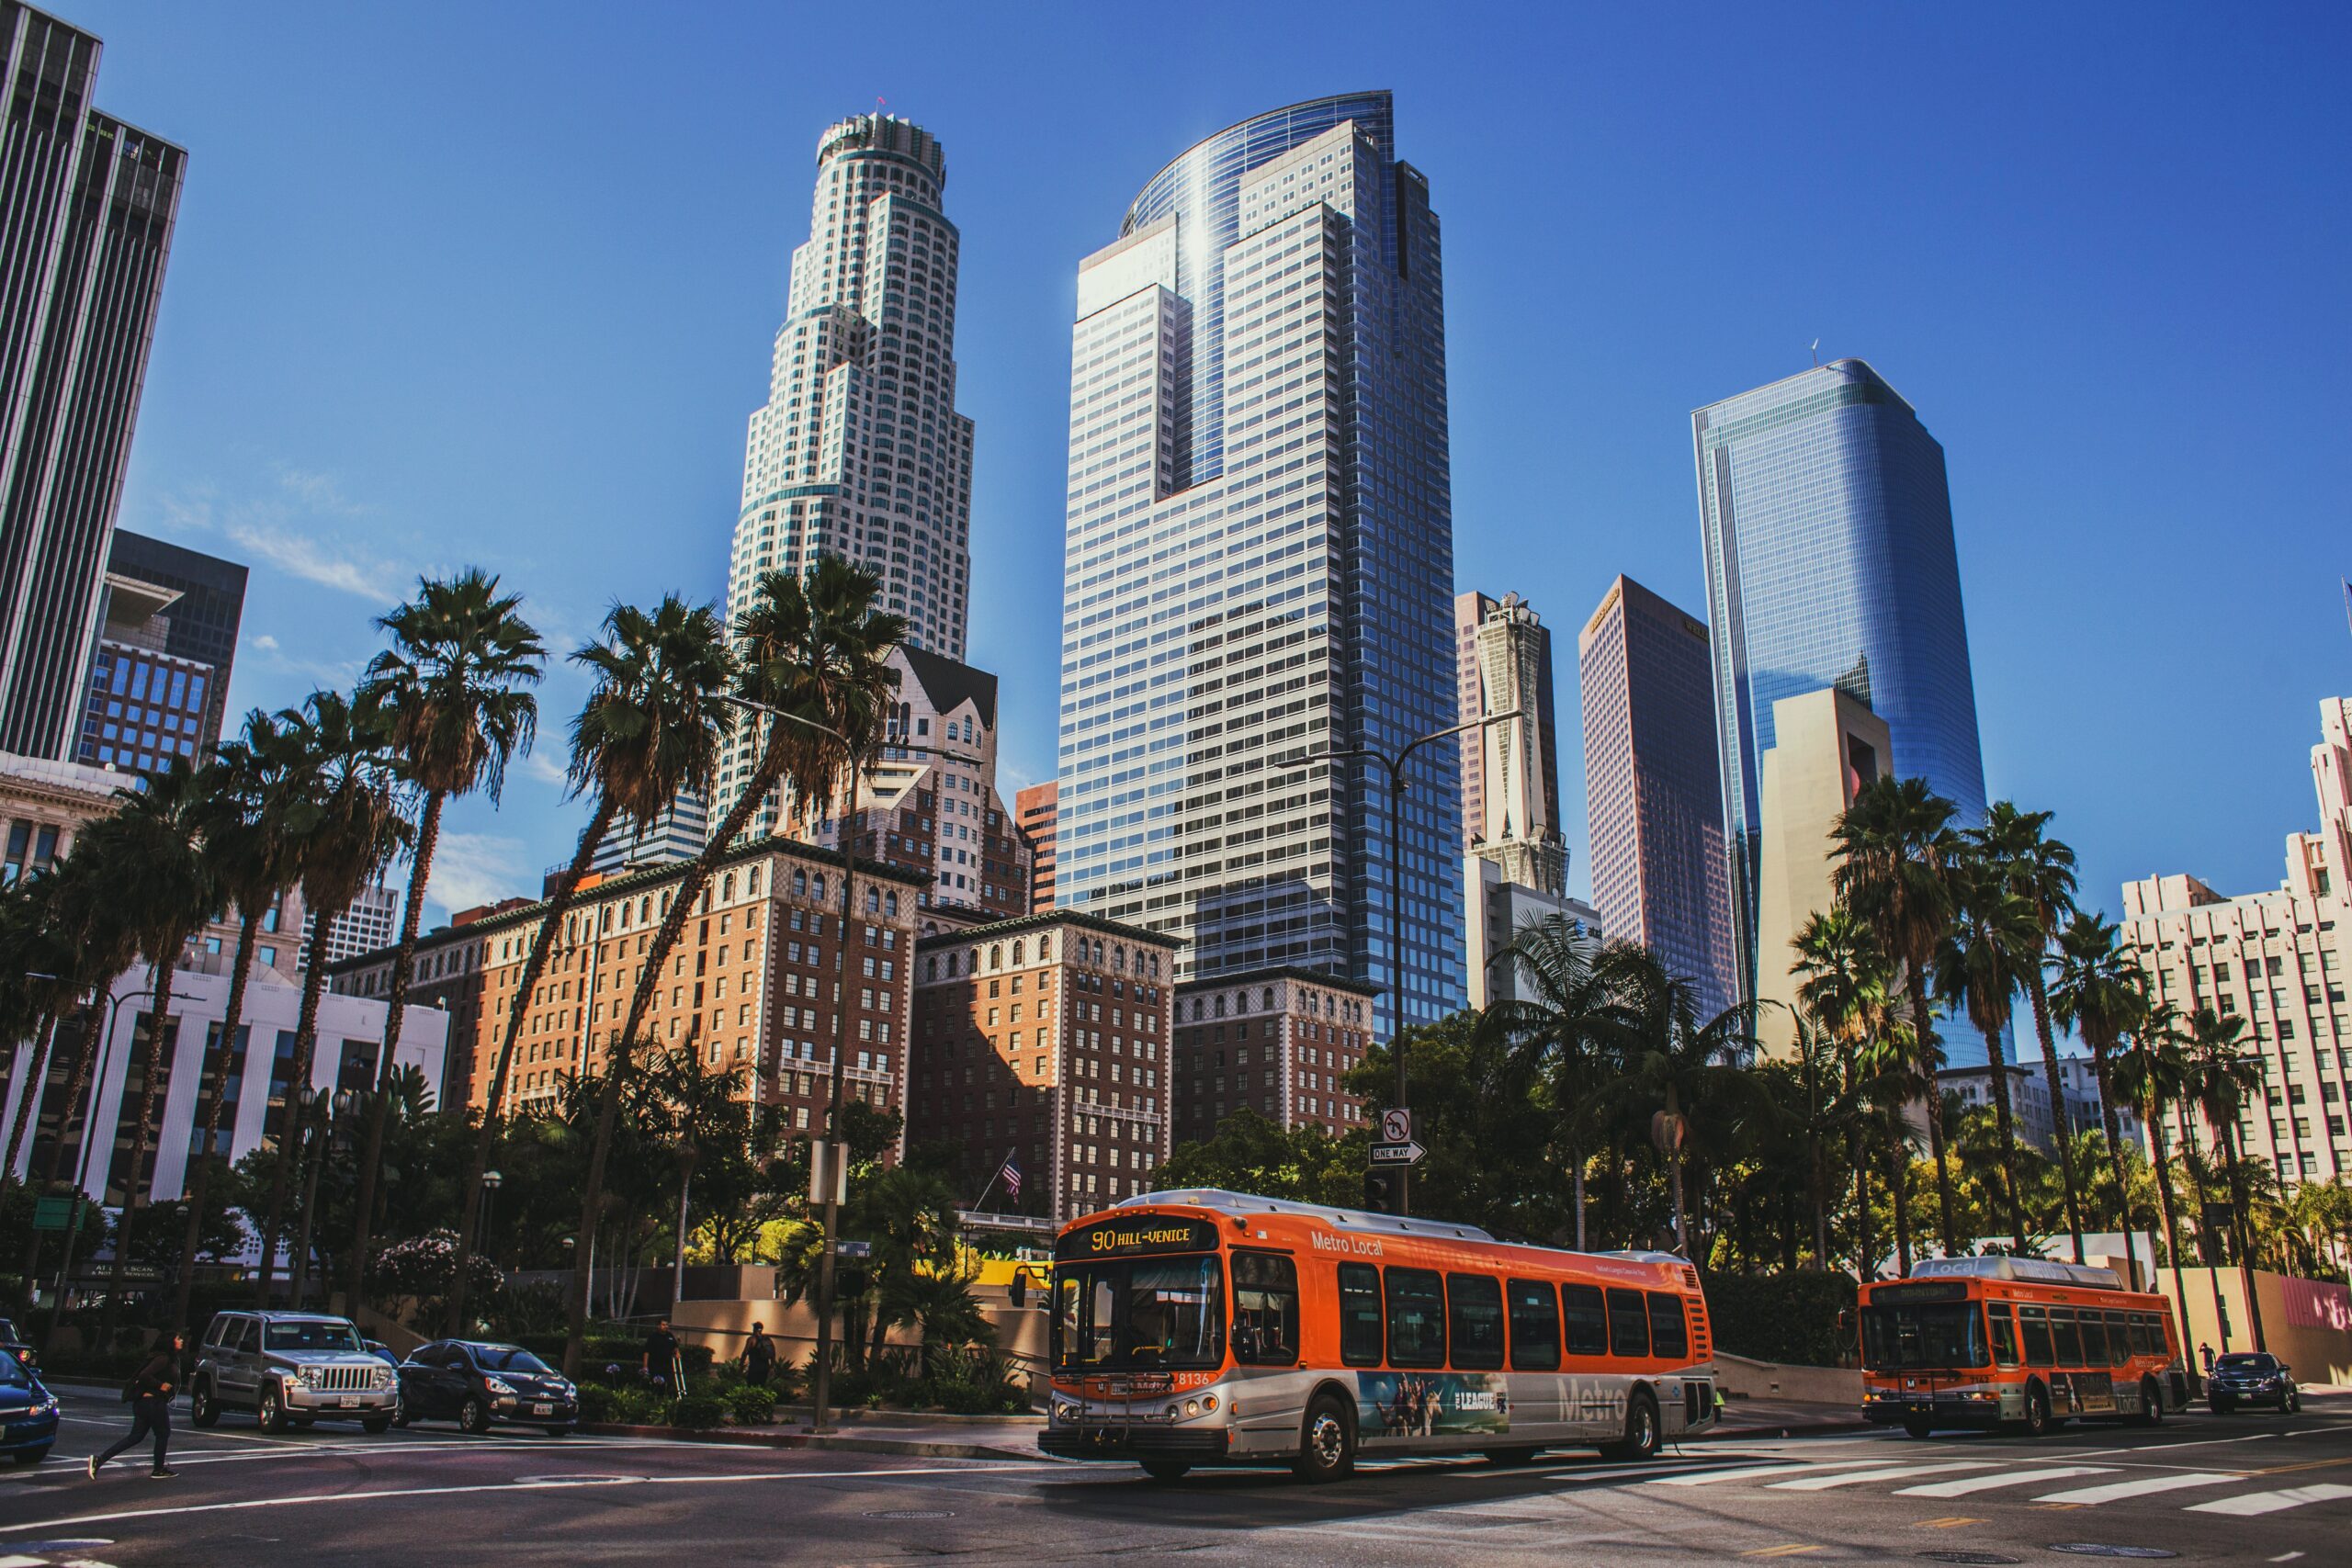 Los Angeles A Guide for First-Time Visitors